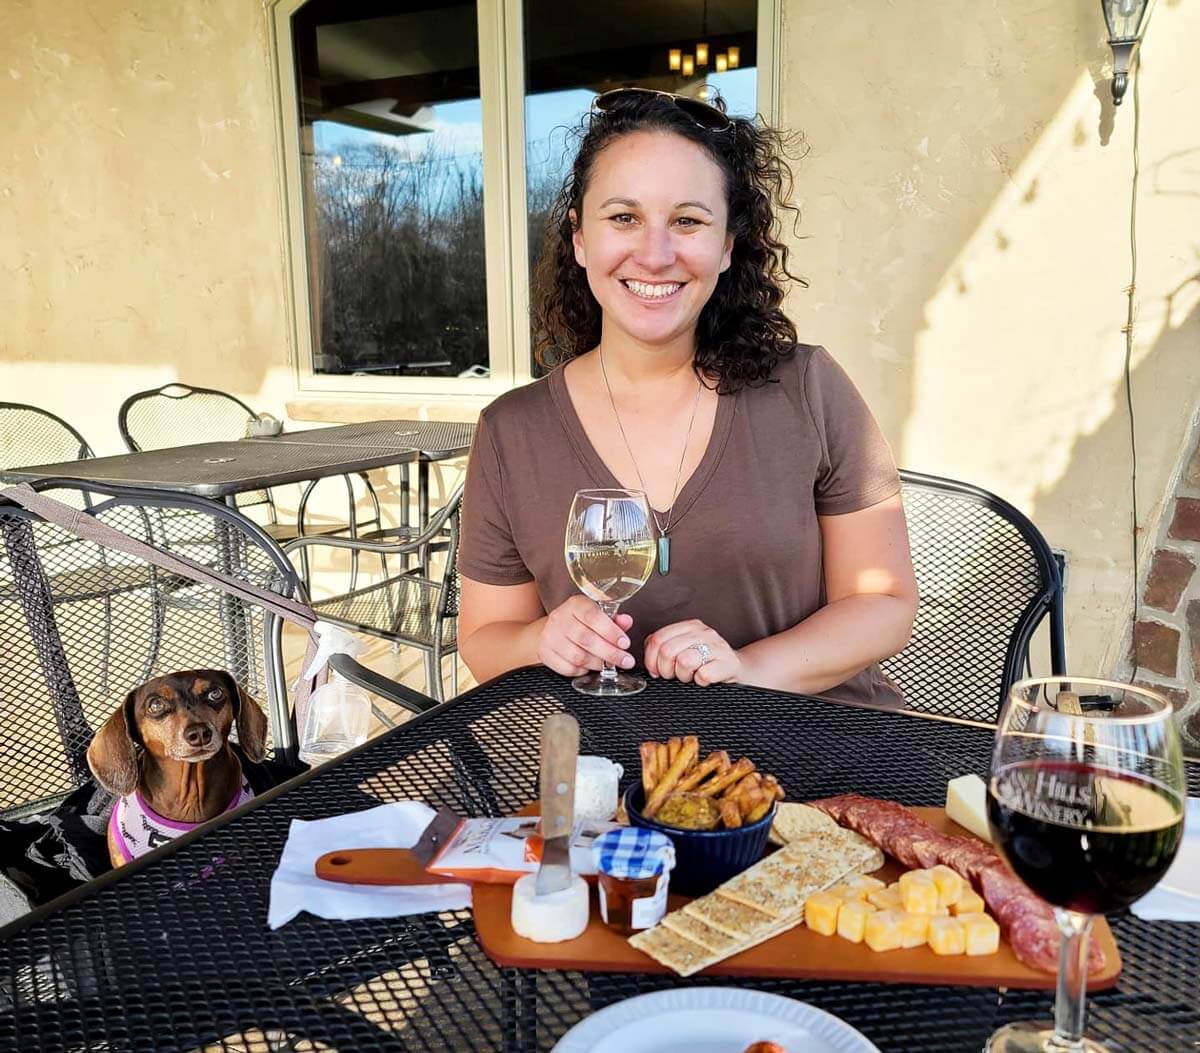 RVer enjoying a wine tasting and cheese board with her dog at a Harvest Hosts location.